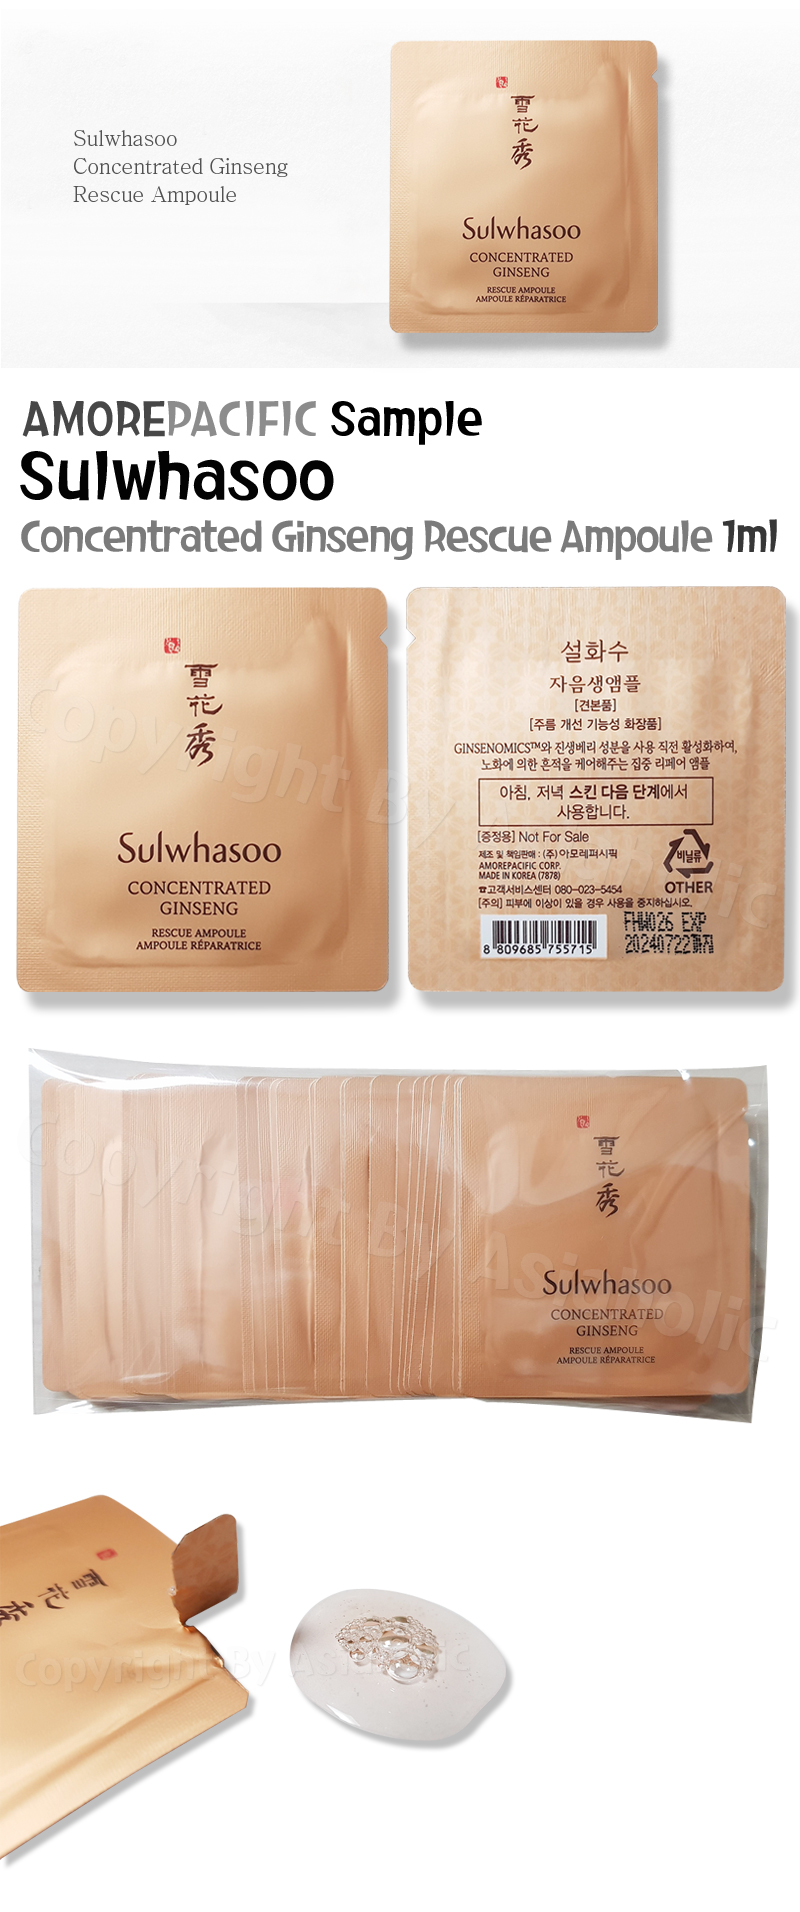 Sulwhasoo Concentrated Ginseng Rescue Ampoule 1ml (10pcs ~ 130pcs) Sample Newest Version